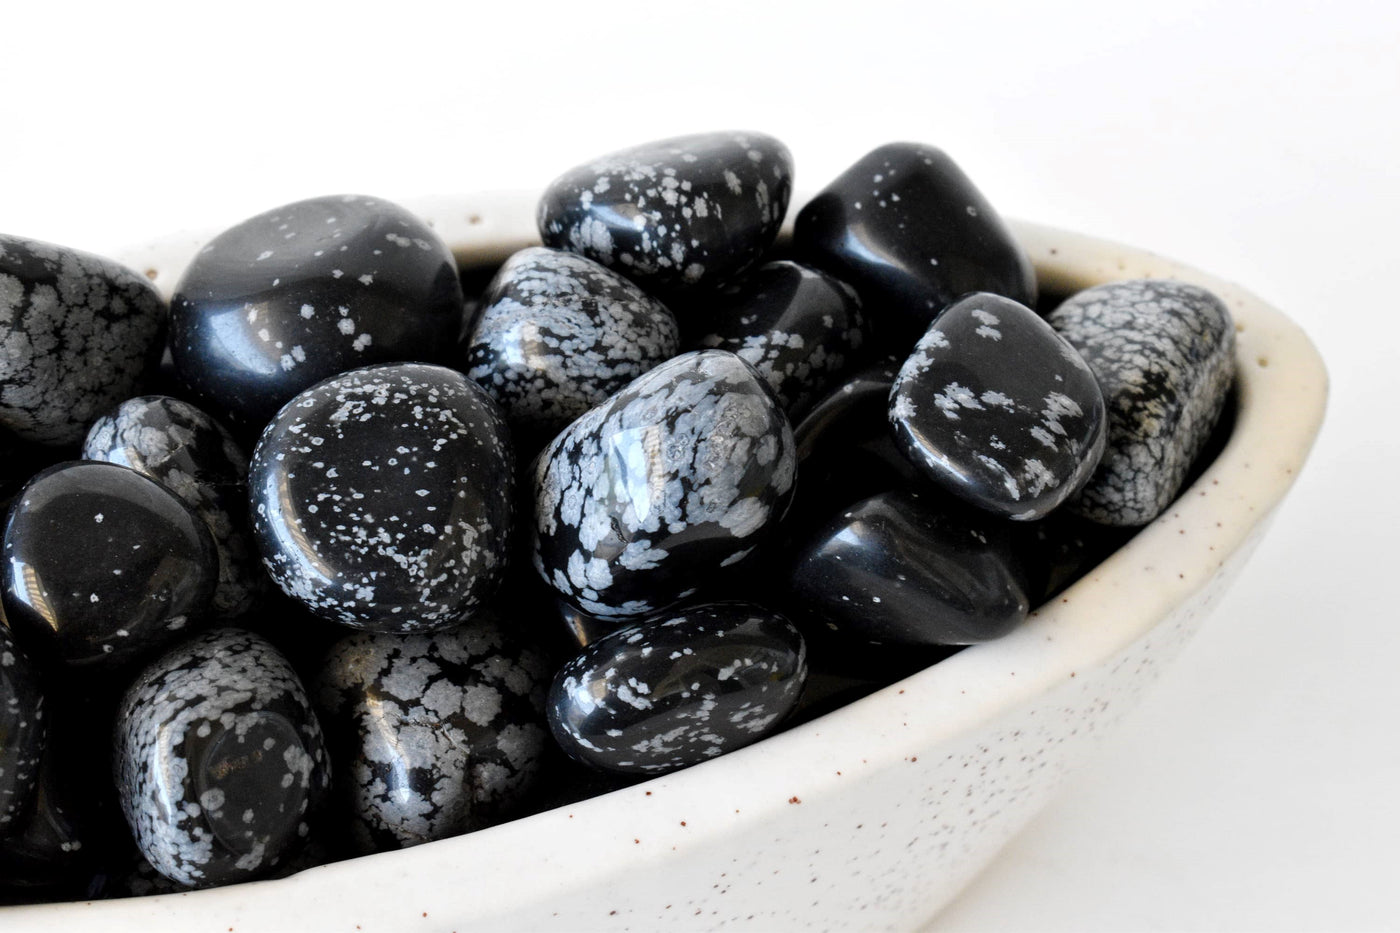 Snowflake Obsidian Tumbled Crystals (Alignment With The Higher Self and Channeling)